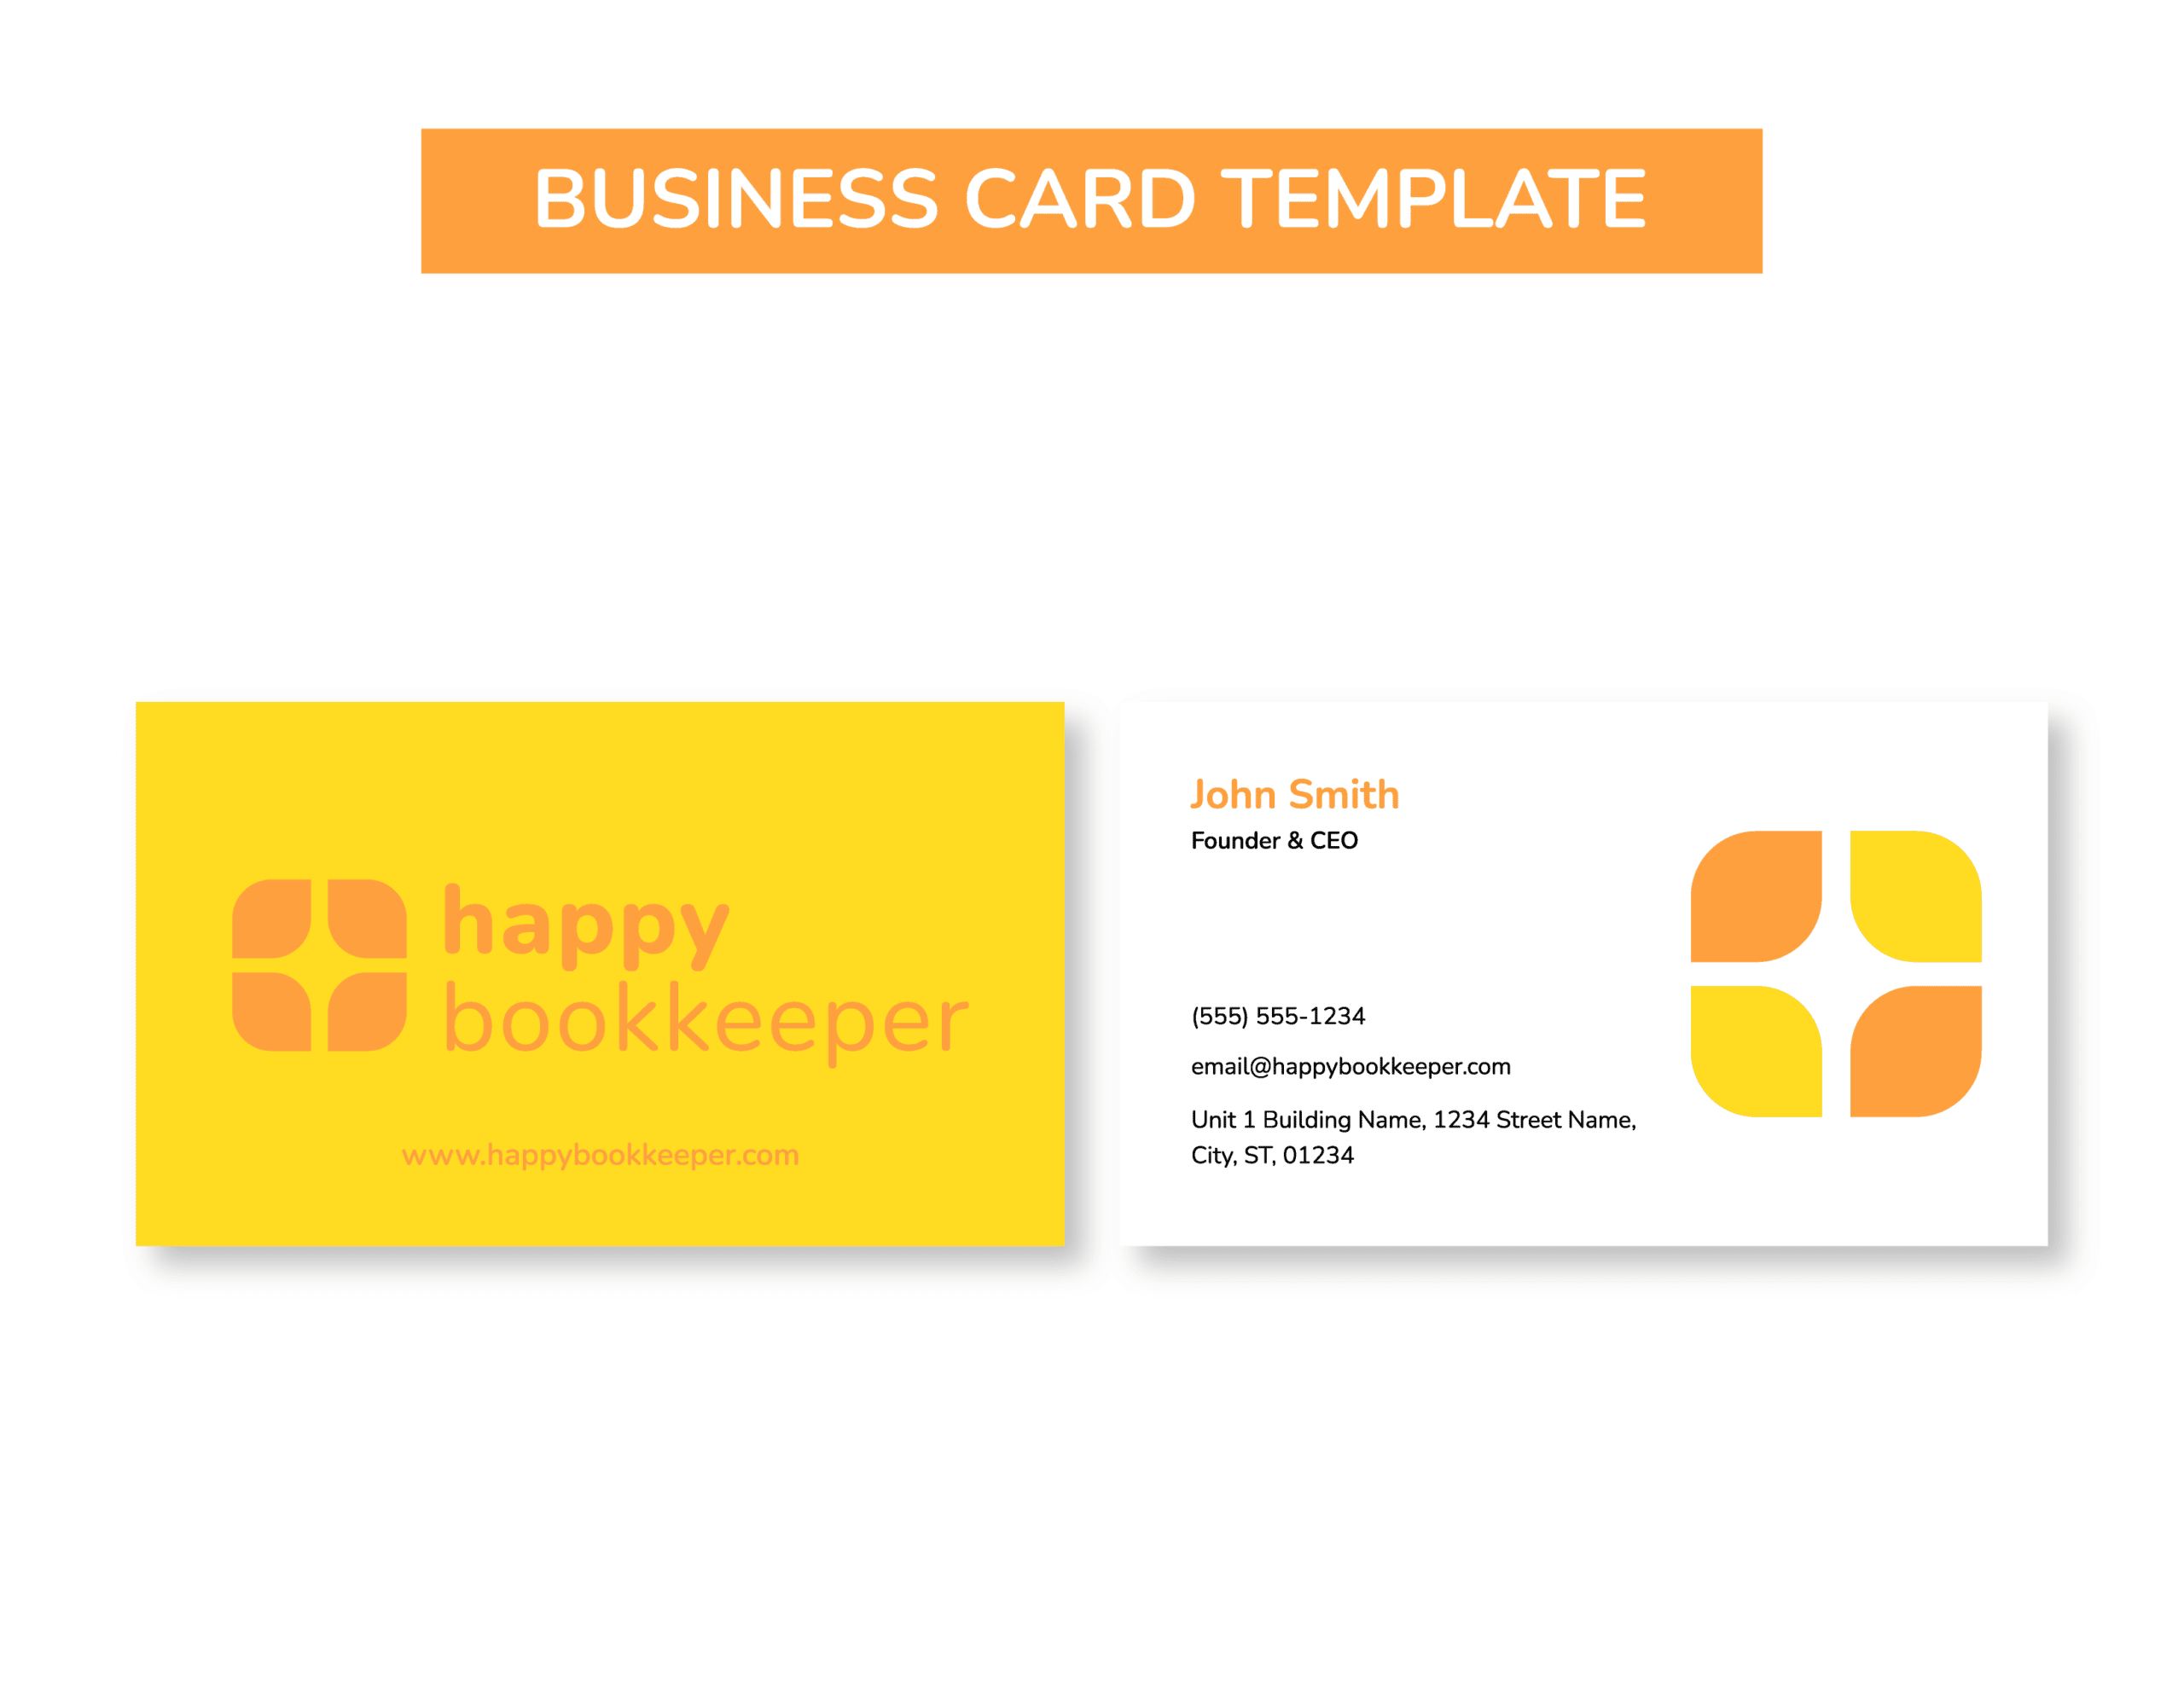 04Happy_Showcase_Business Card Template